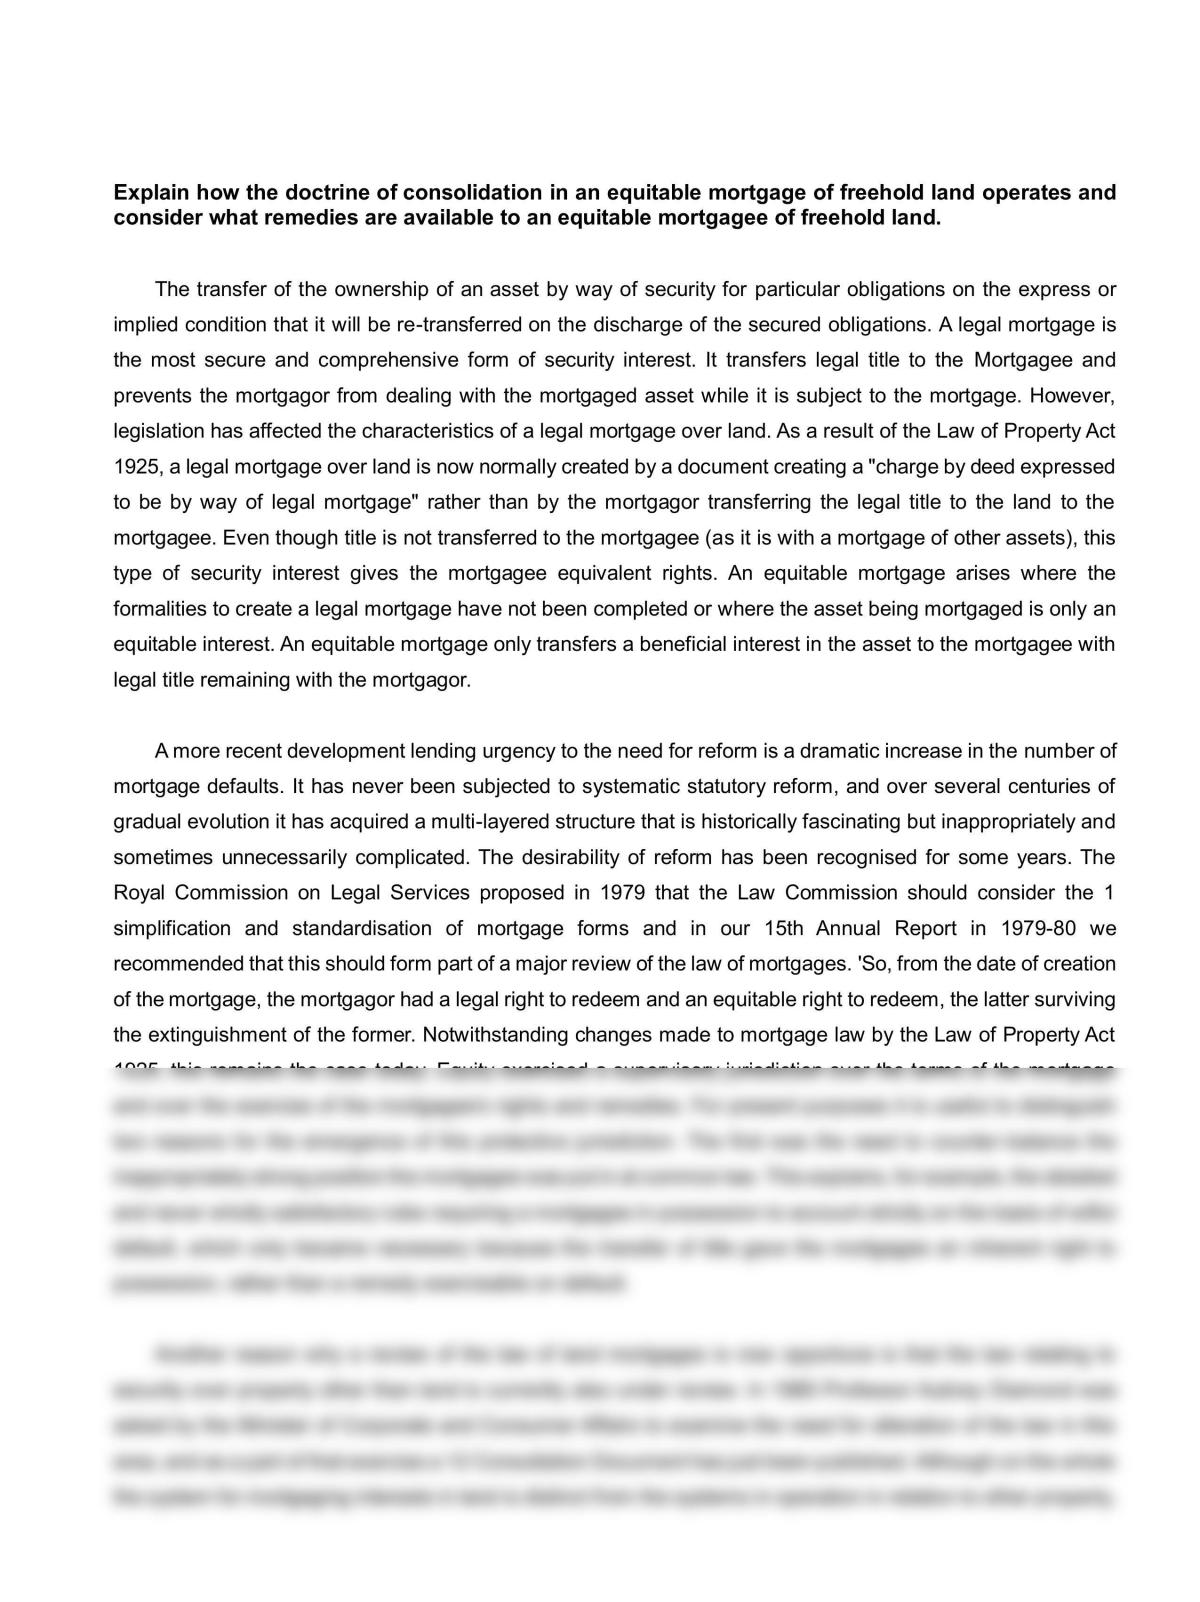 Essay discussing the operation of doctrine of consolidation in equitable mortgage and remedies available. - Page 1